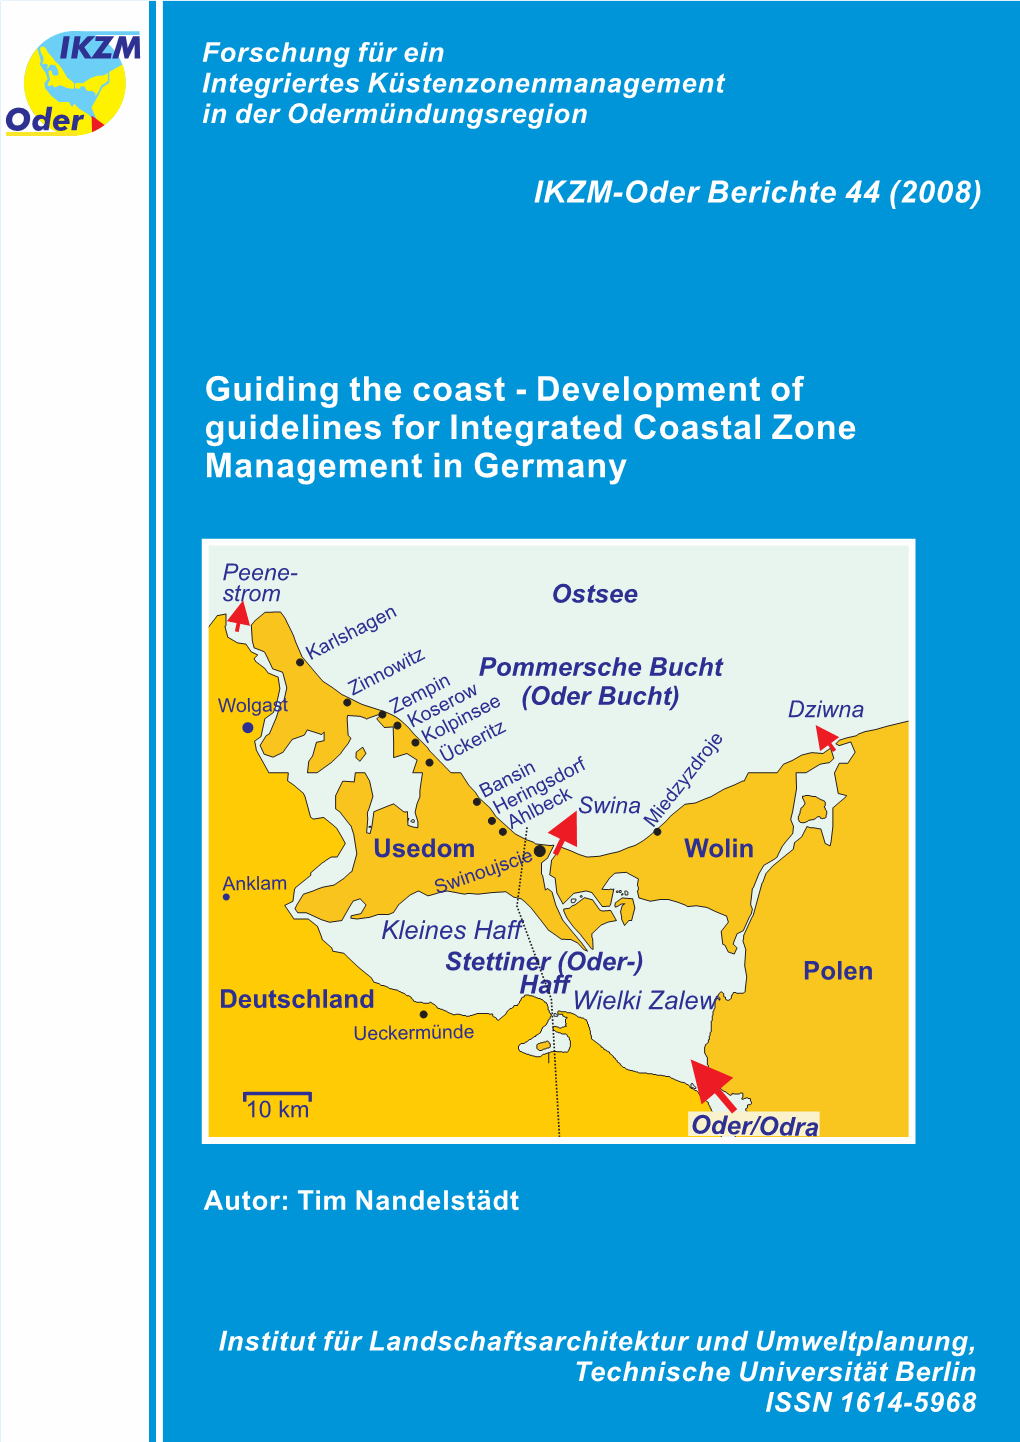 Development of Guidelines for Integrated Coastal Zone Management in Germany